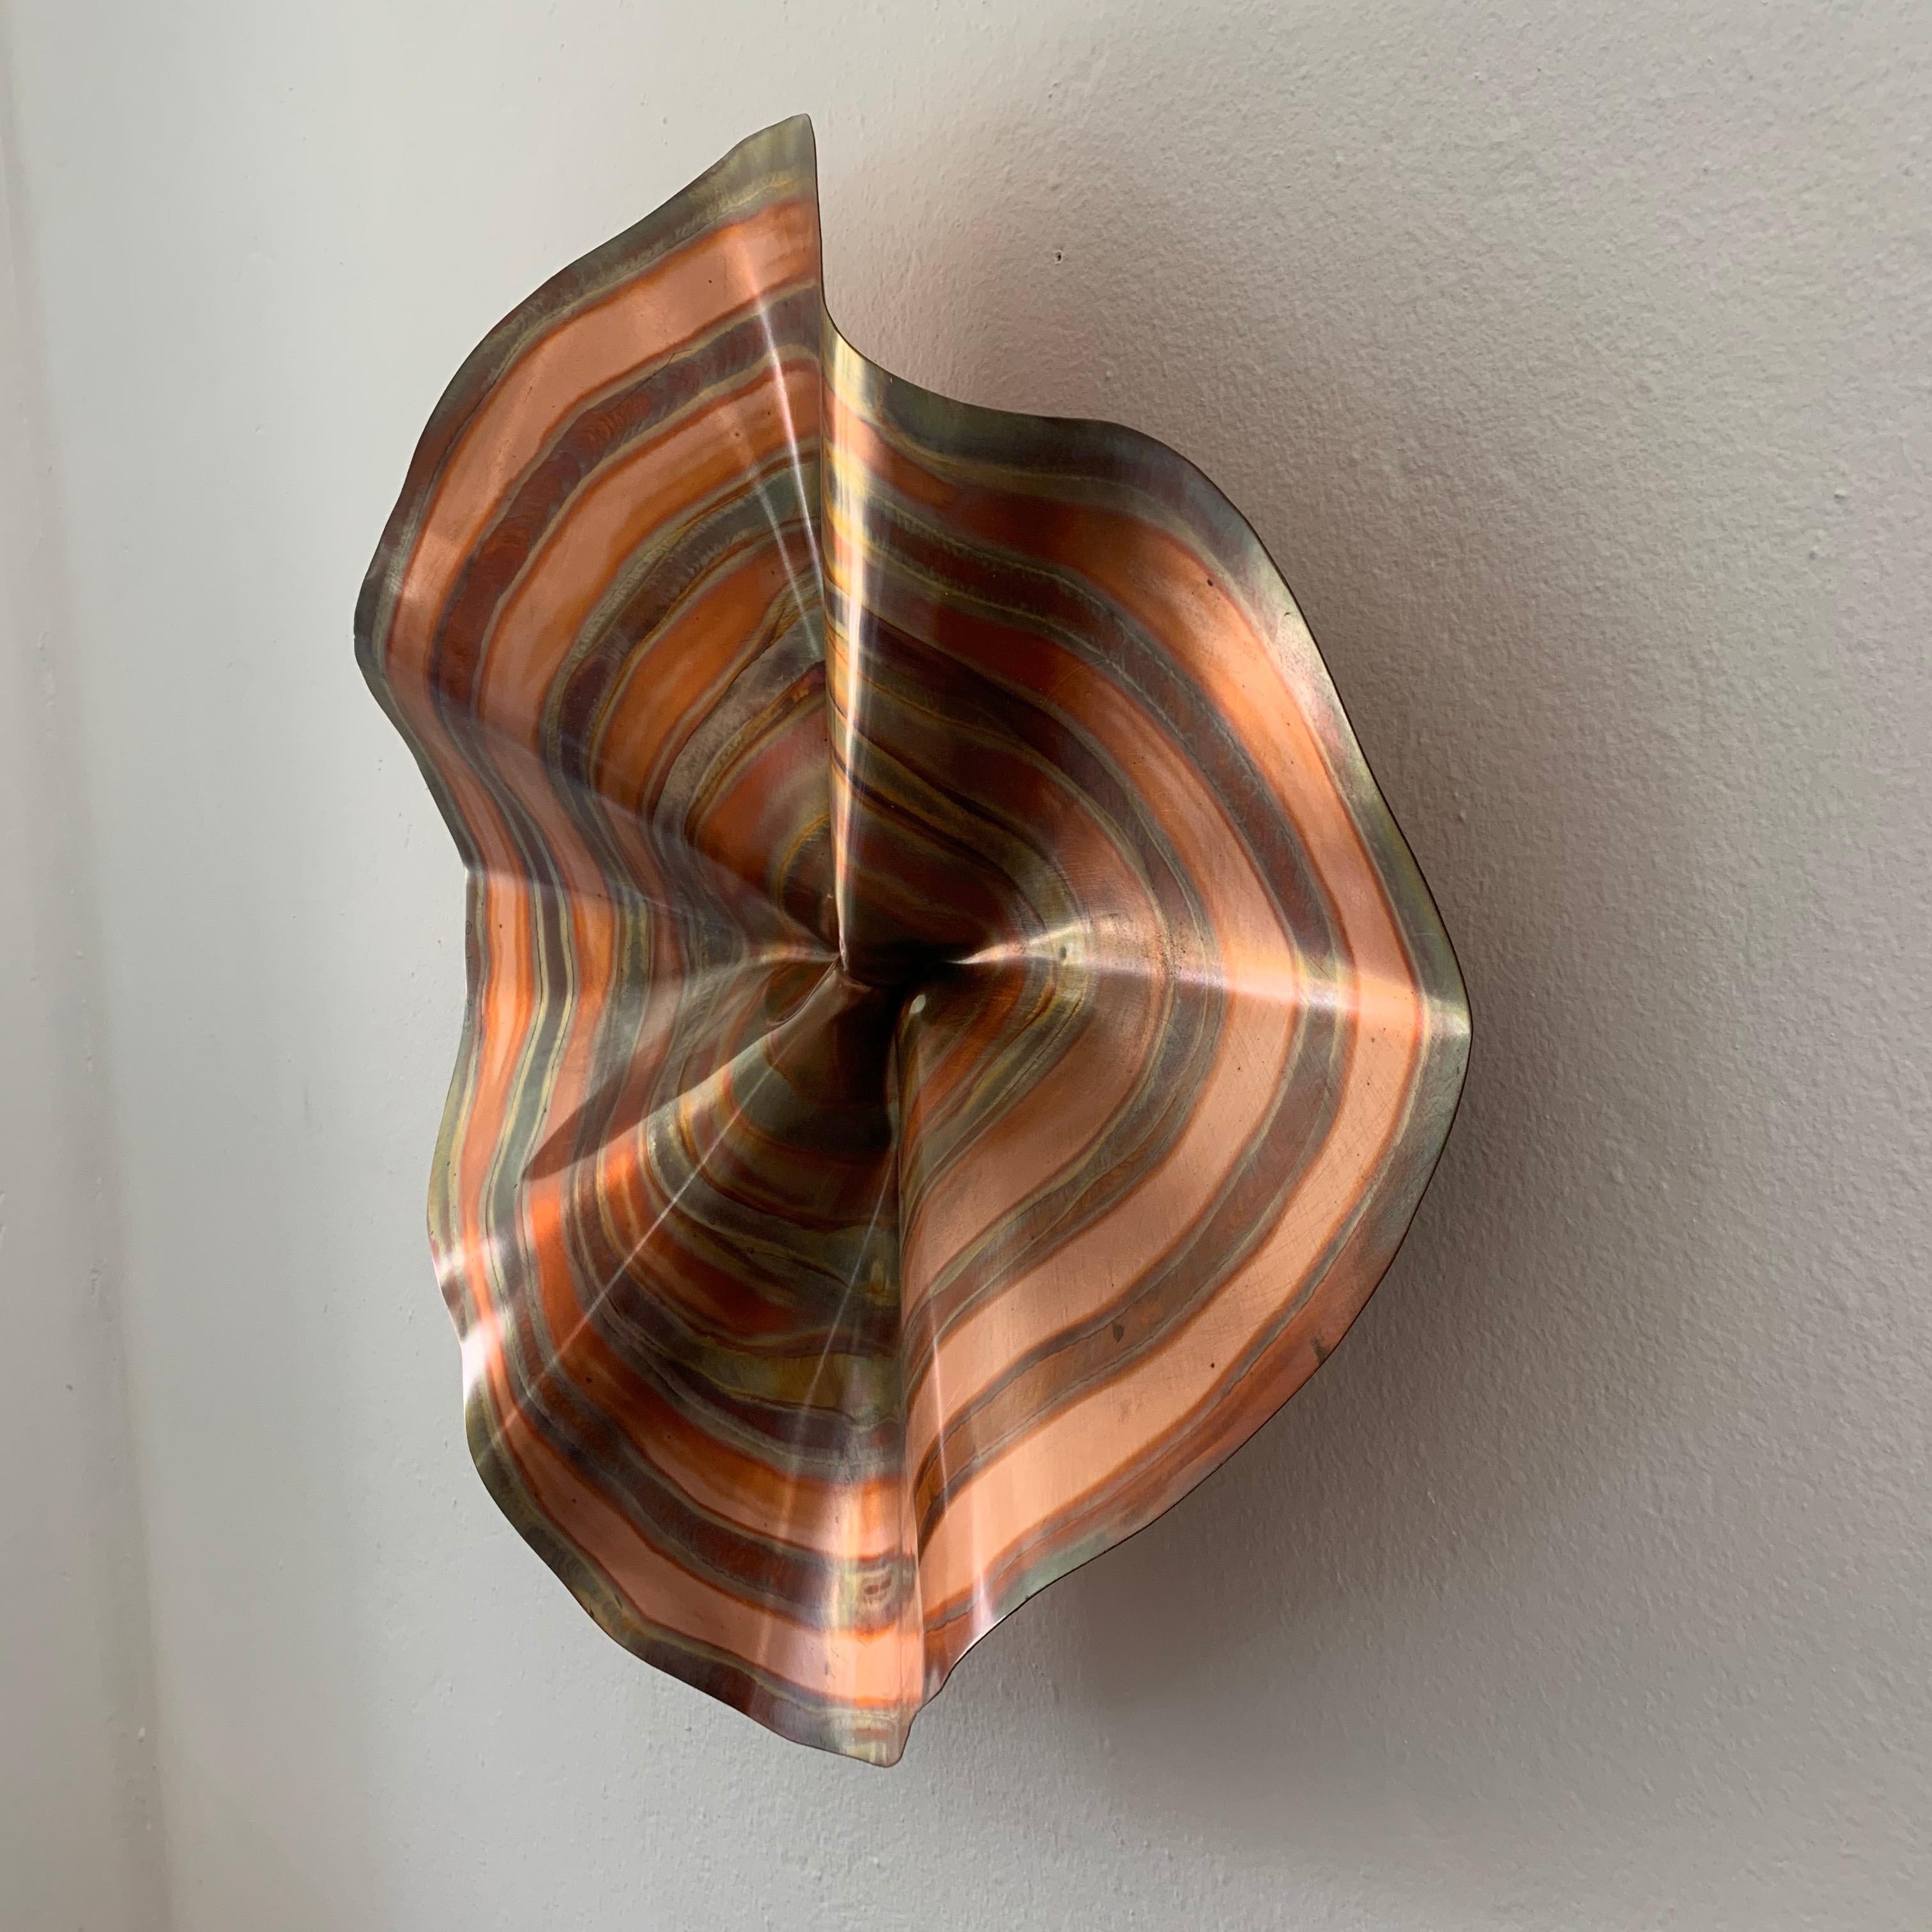 Wall sculpture rendered in acid and torch etched bent copper, designed by Curtis Jere, 2003, USA.